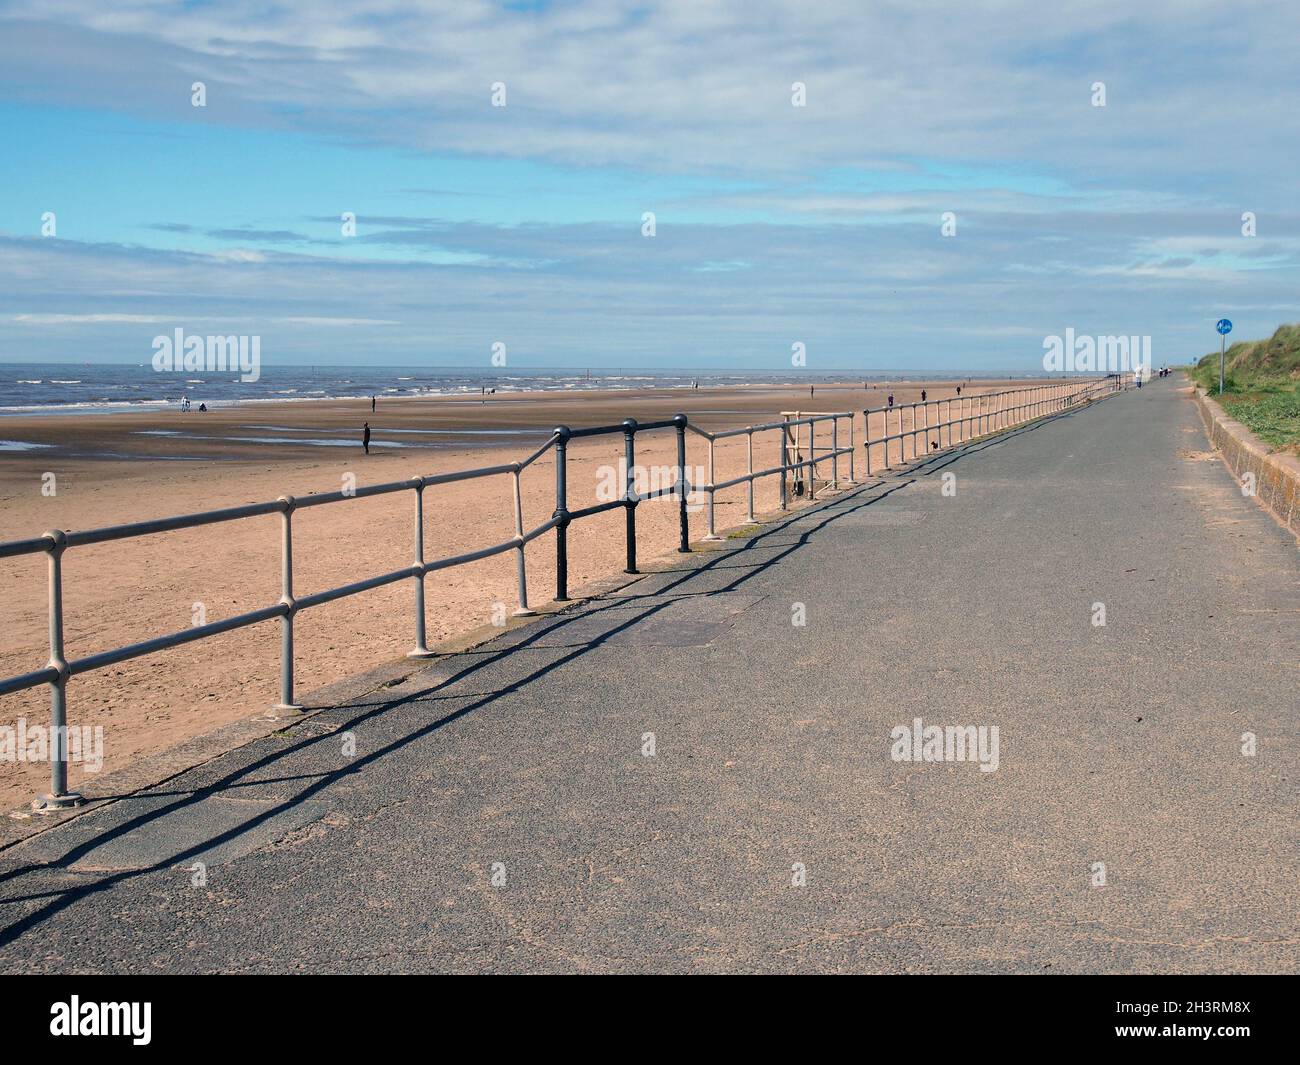 The pedestrian walkway next to the sea in crosby merseyside with distant figures on the beach on summer sunlight Stock Photo